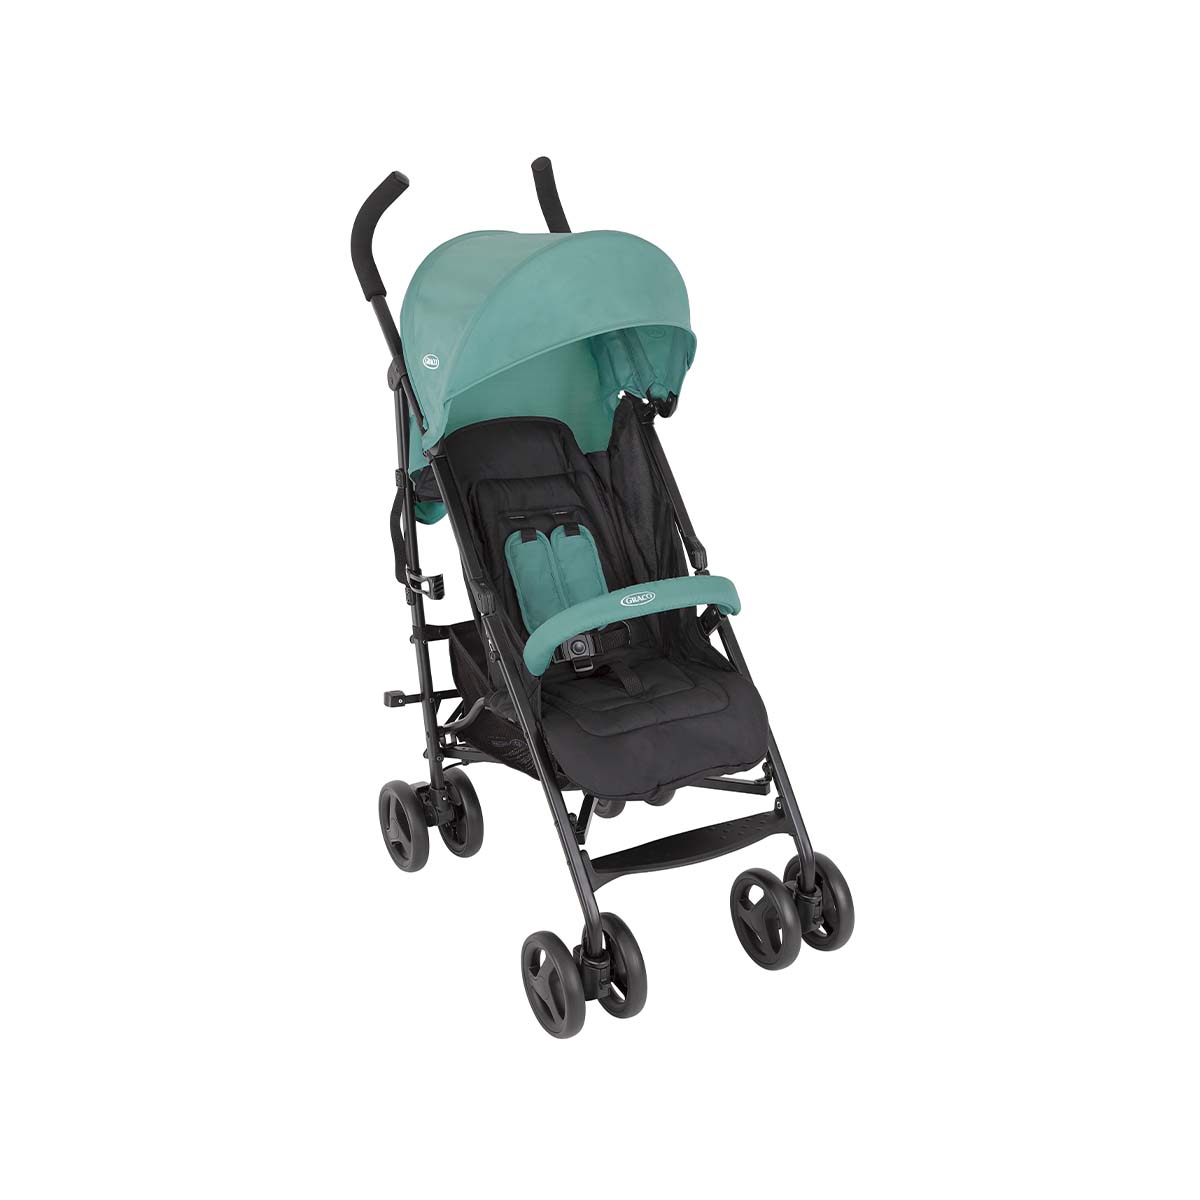 Graco TraveLite stroller front facing angle with handlebar